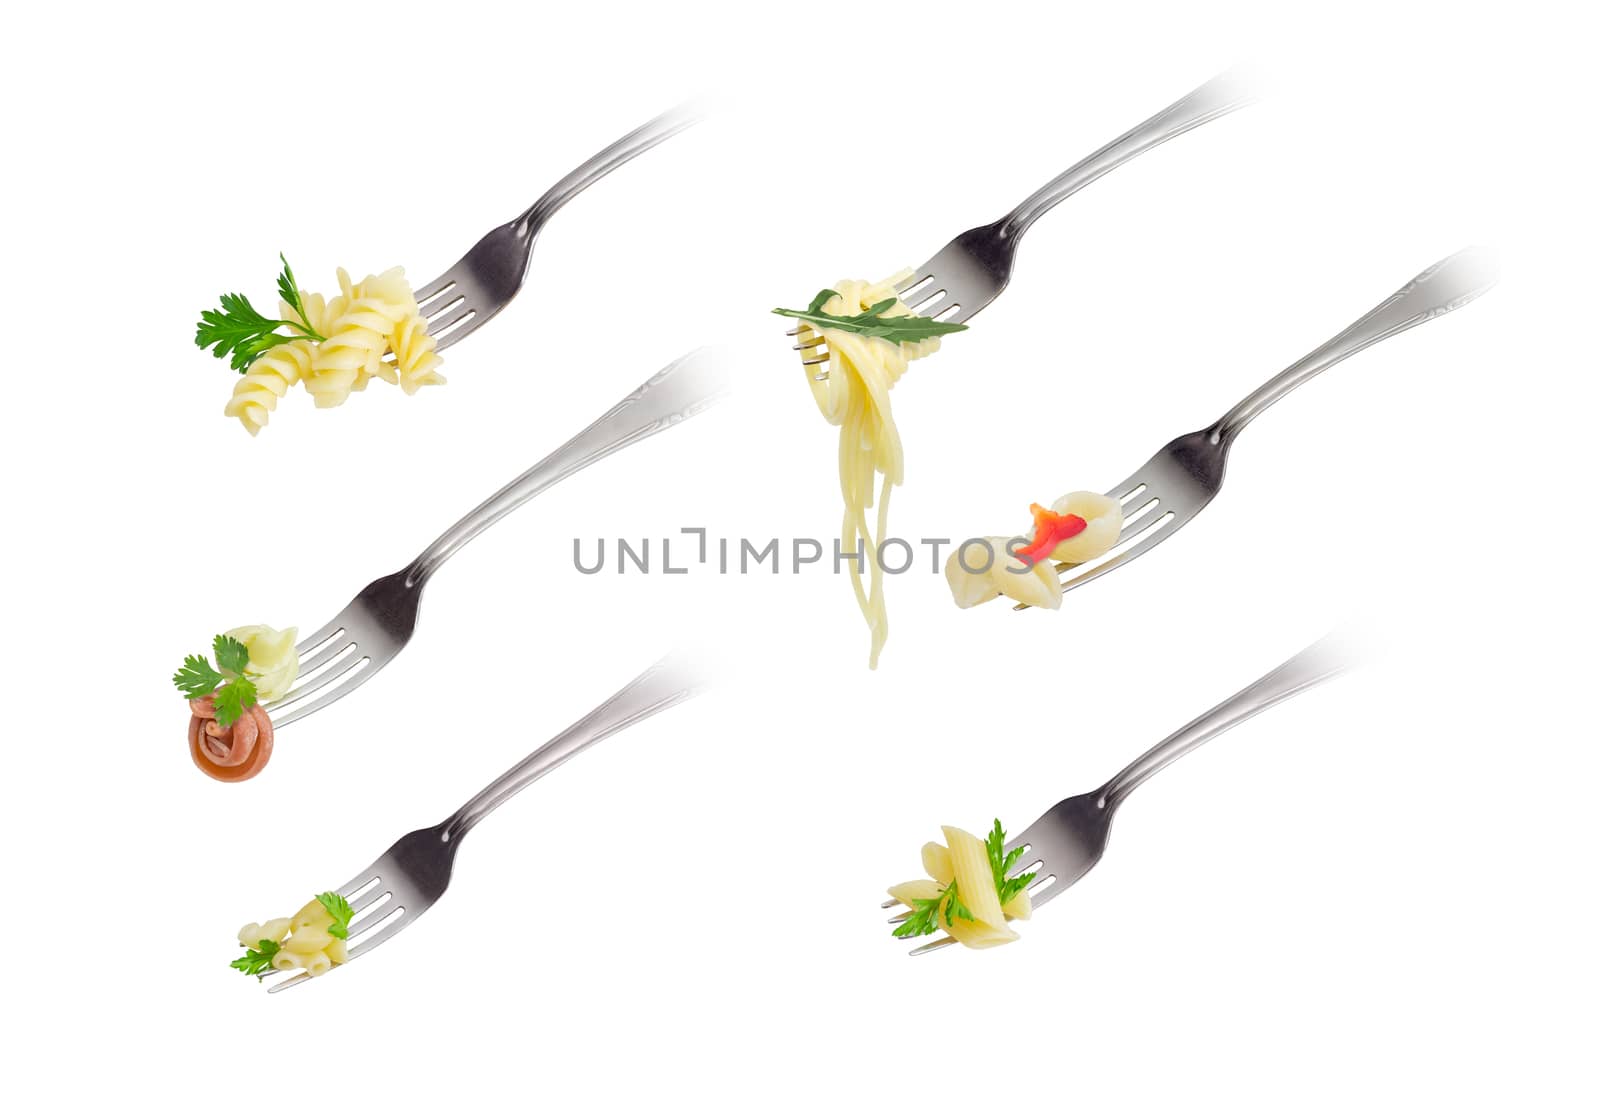 Set of images of the various cooked pasta on the stainless steel fork on a light background
